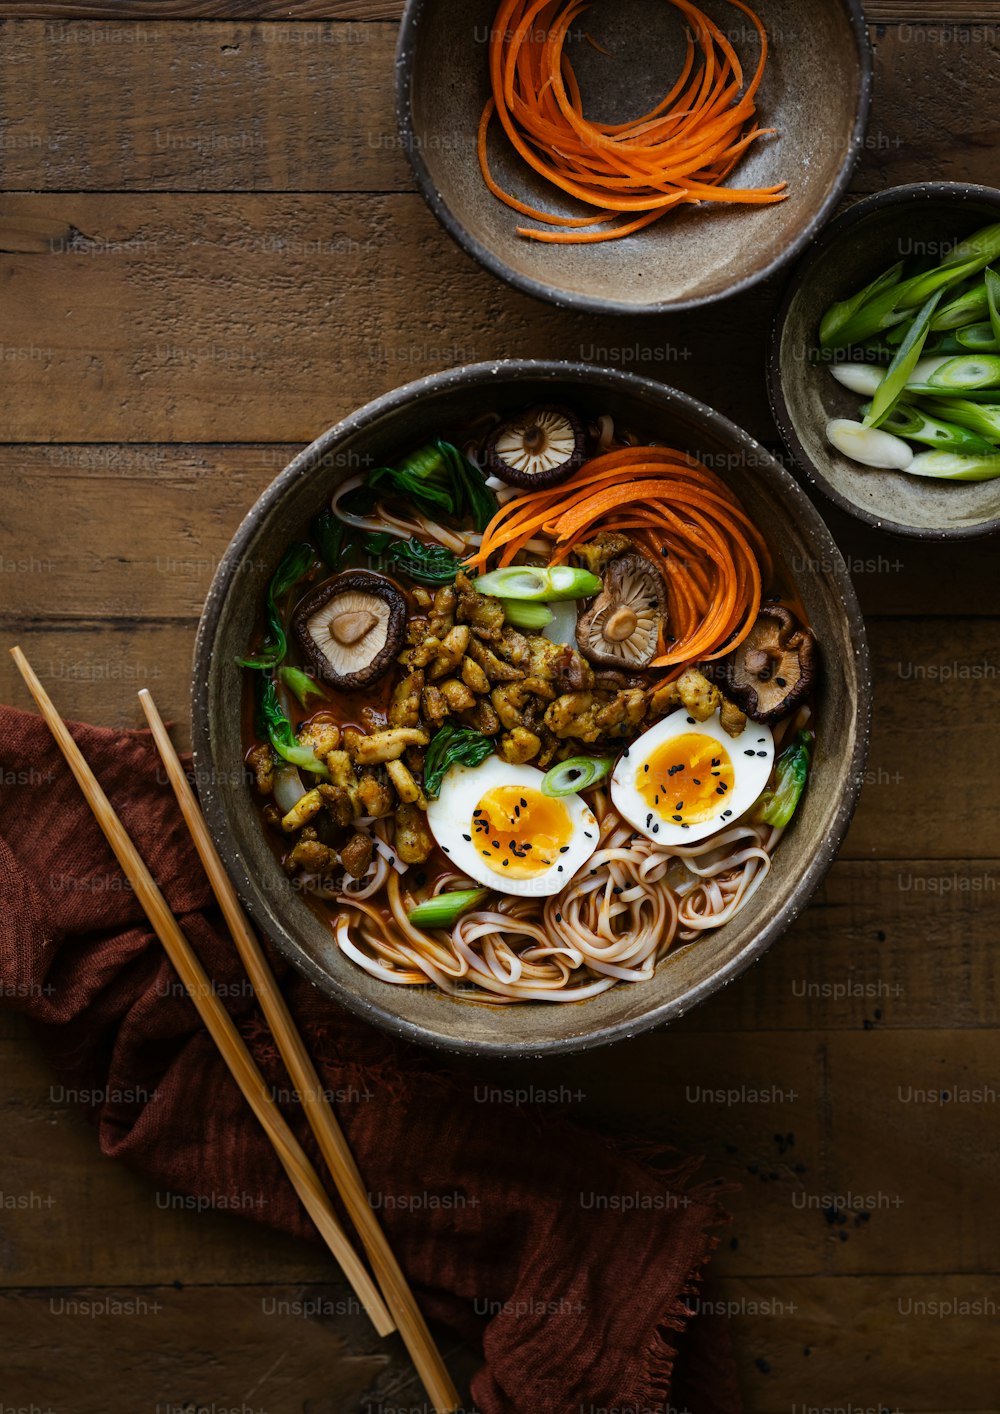 a bowl of noodles, carrots, mushrooms, and other vegetables